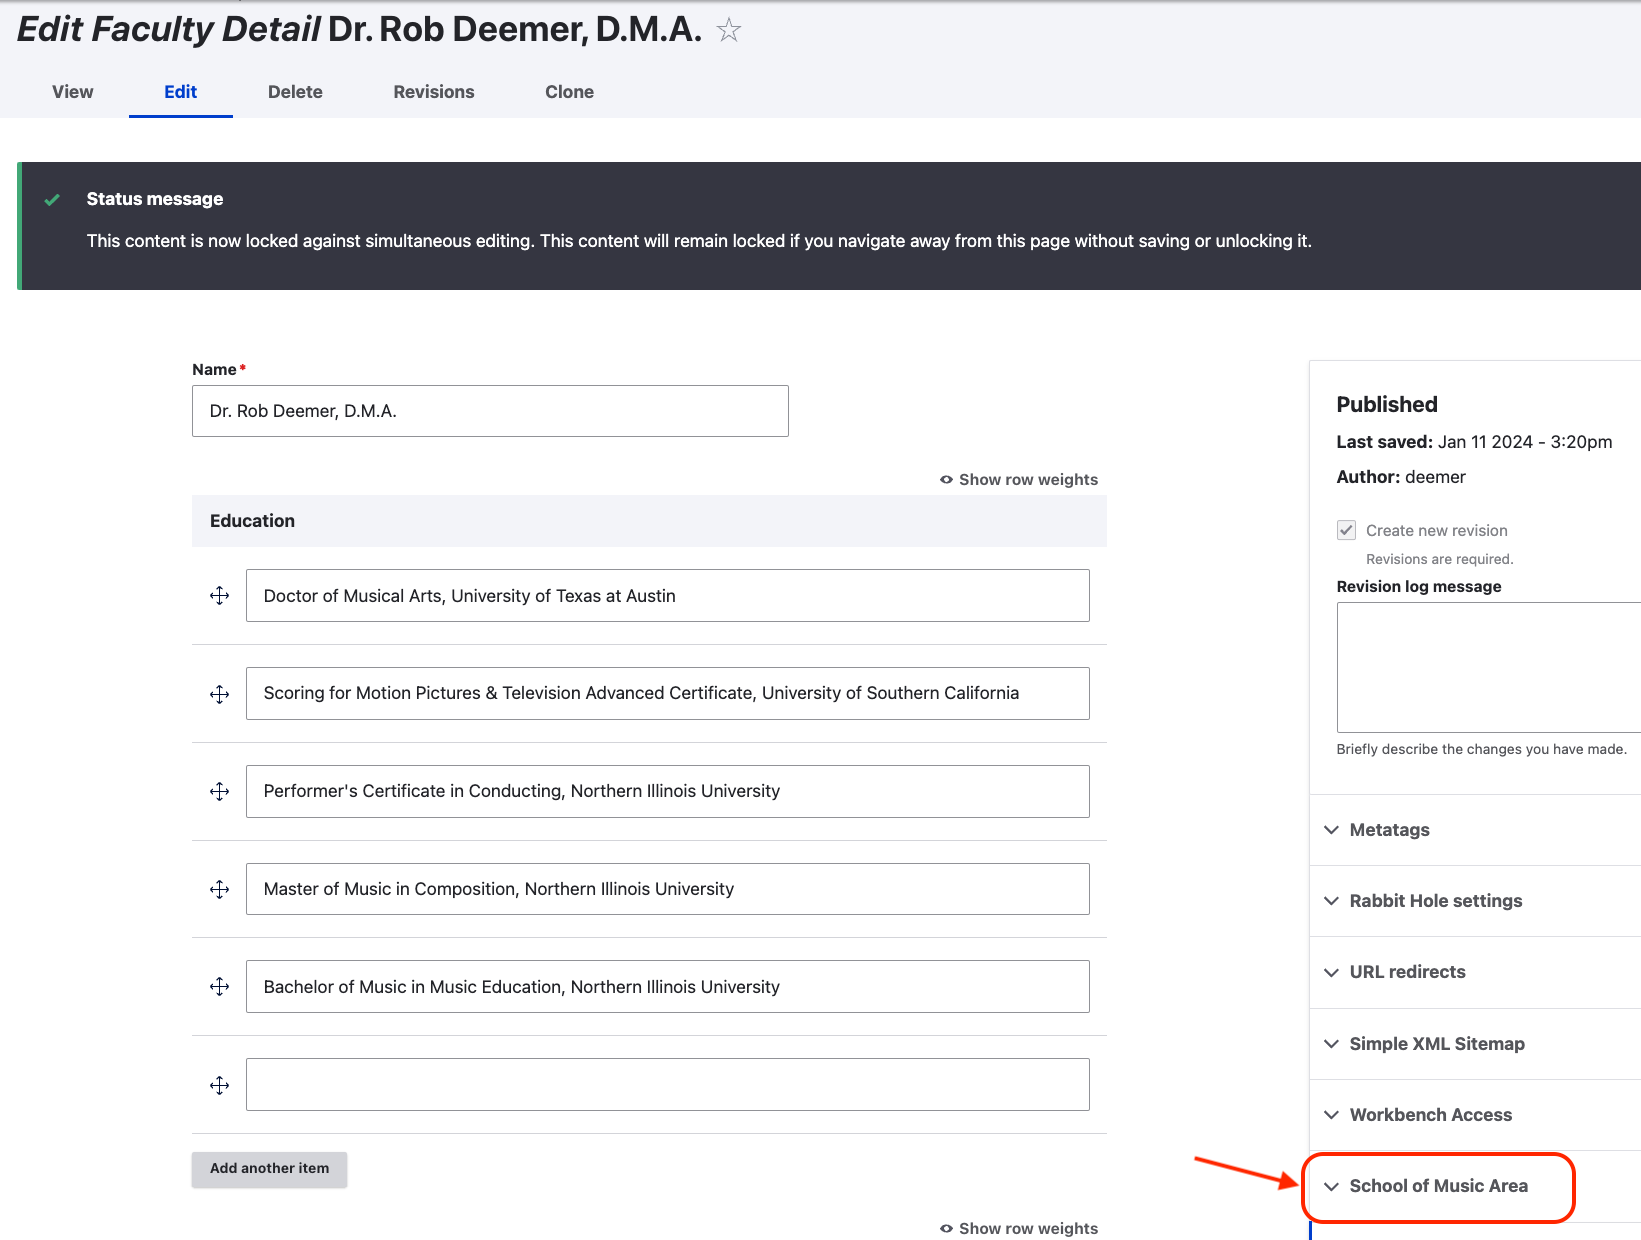 Example to edit Faculty Detail page for Dr. Rob Deemer.